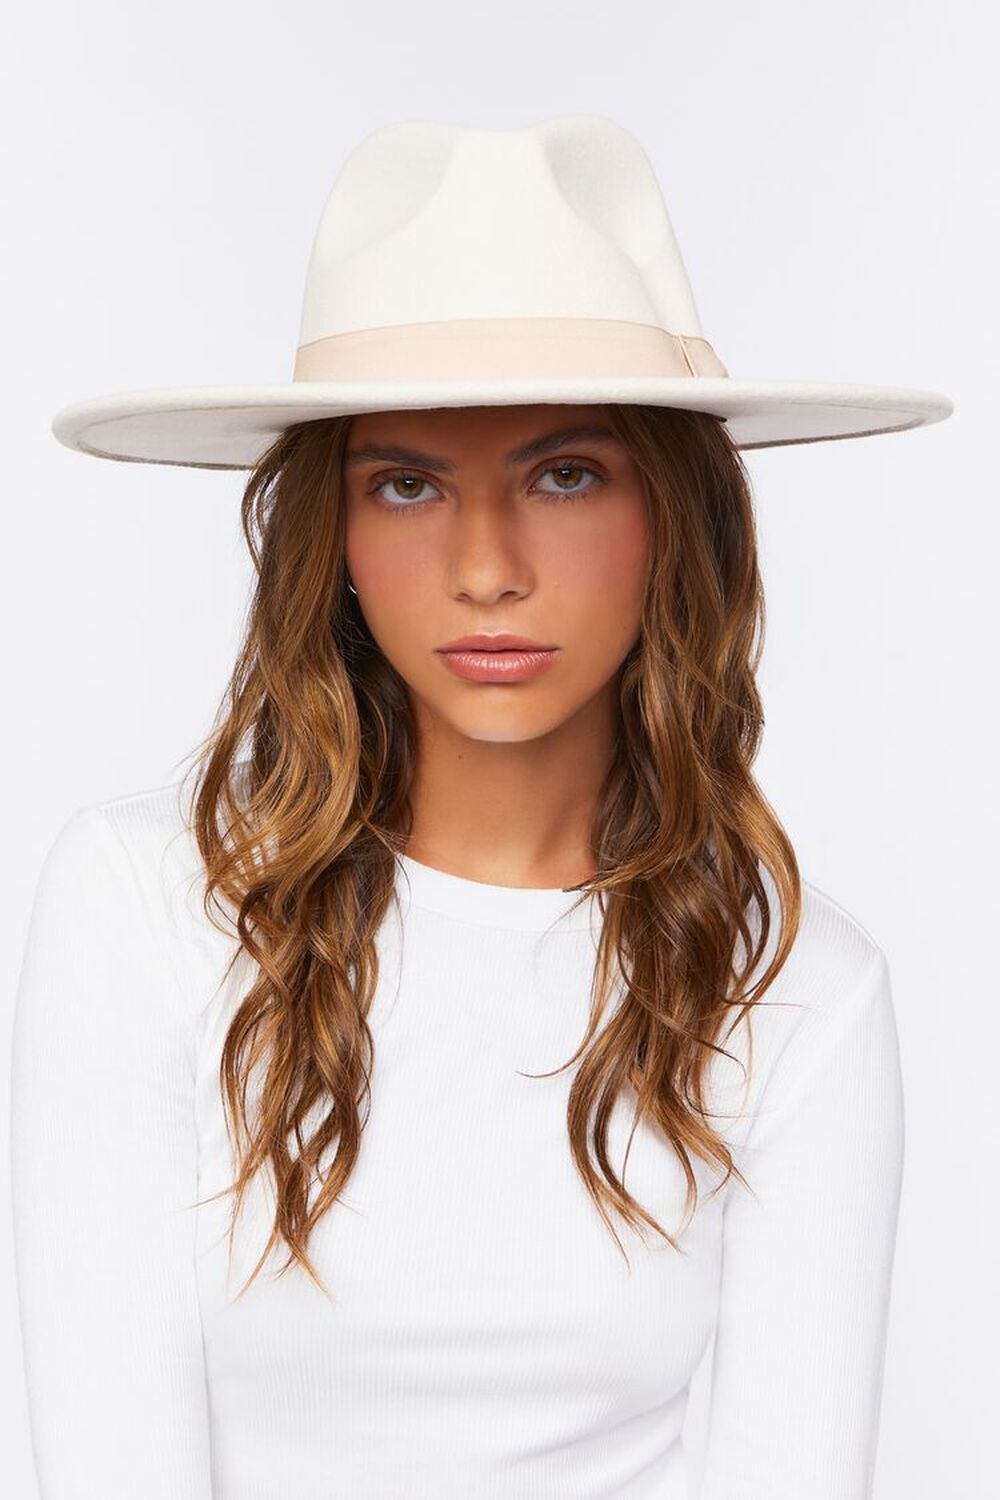 CREAM Pinched Bow Cowboy Hat, image 1